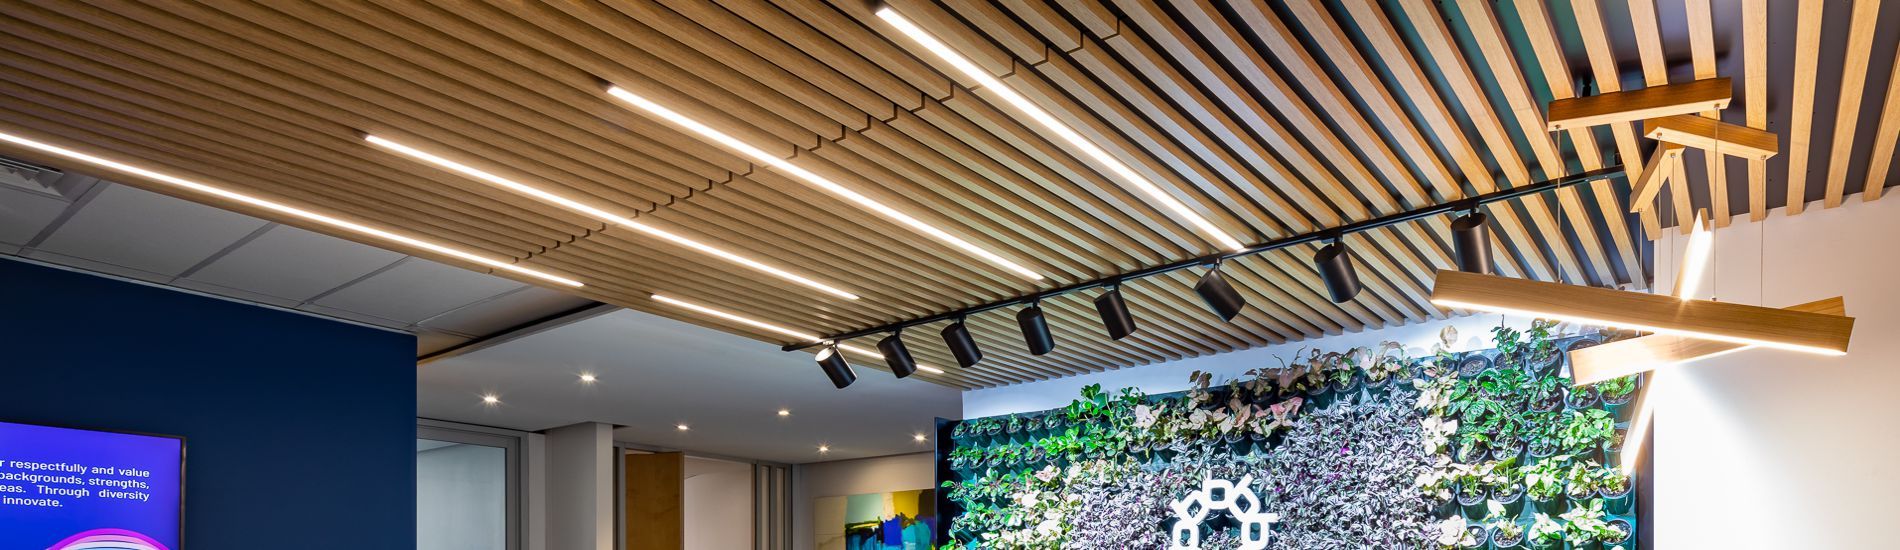 SUPASLAT slatted ceiling panels compliment biophilic theme for office fitout